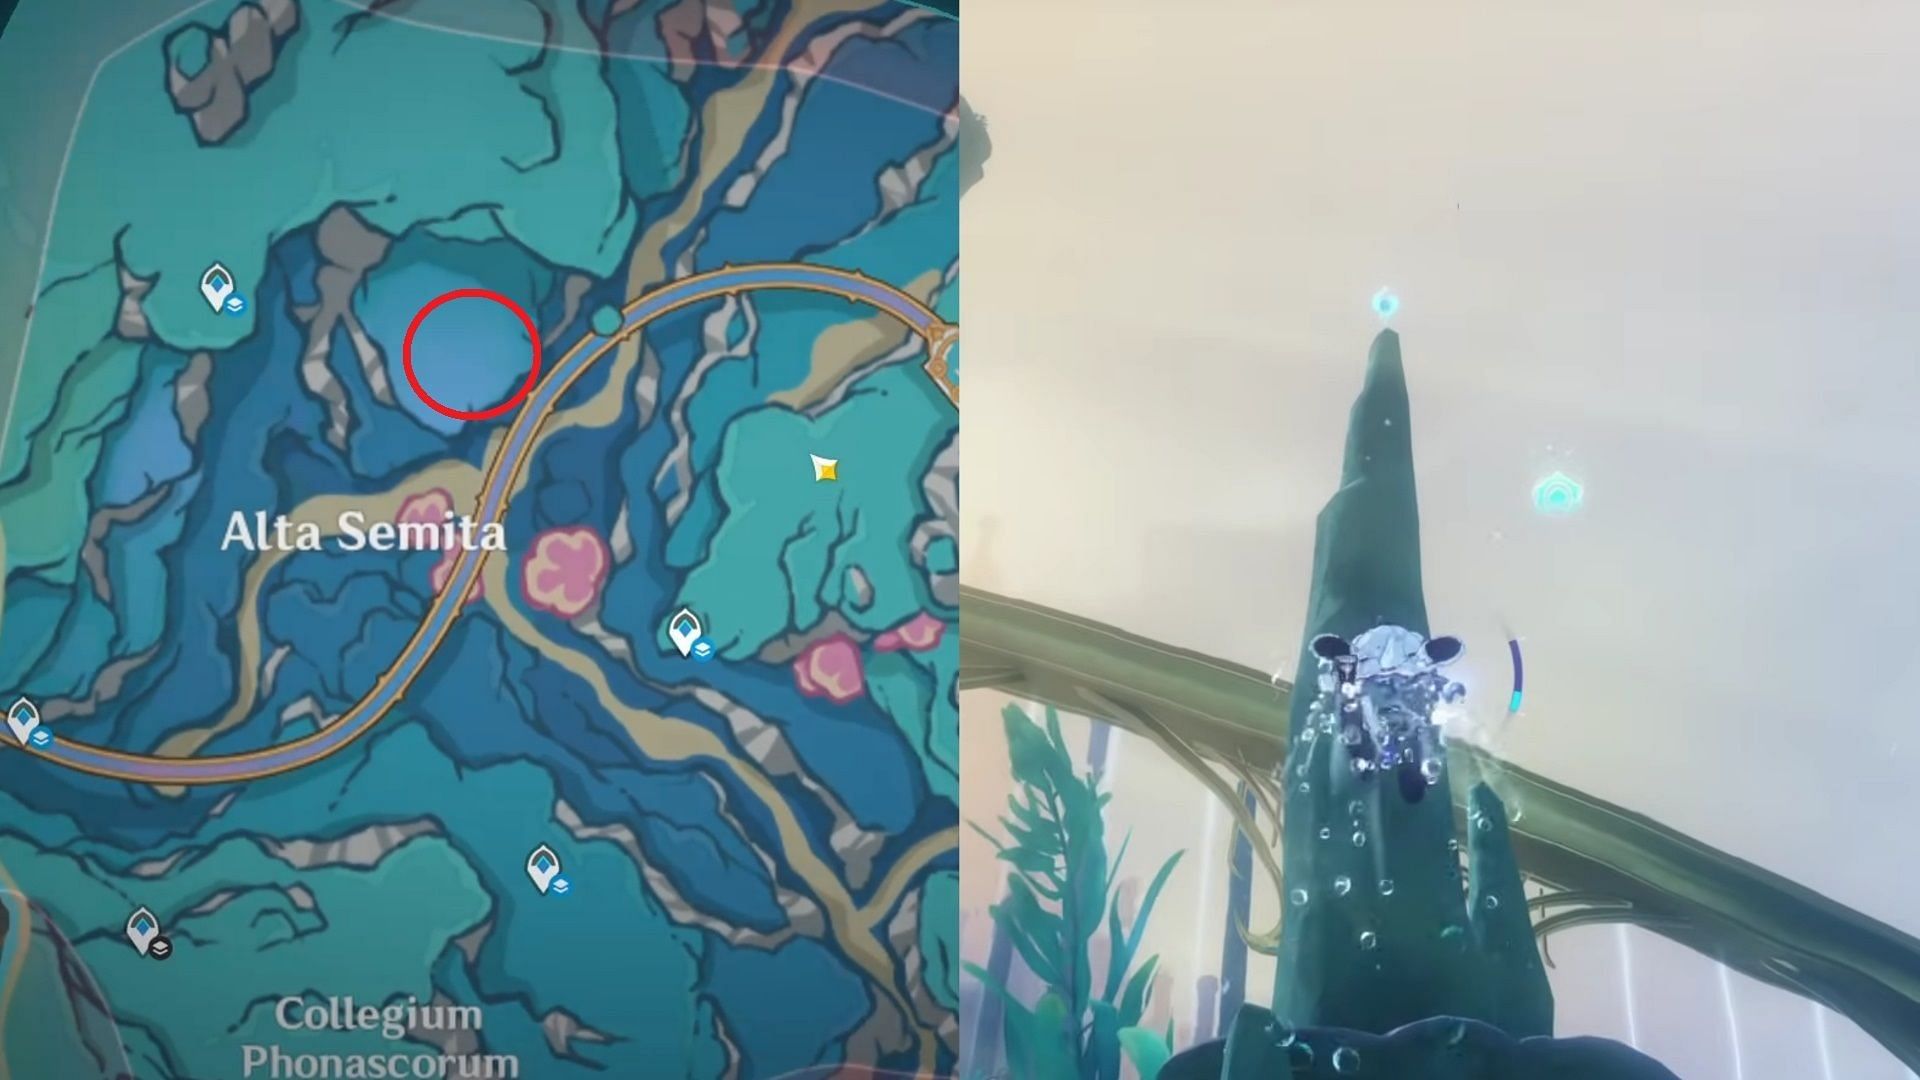 Hydroculus is at the top of the pillar (Image via HoYoverse)